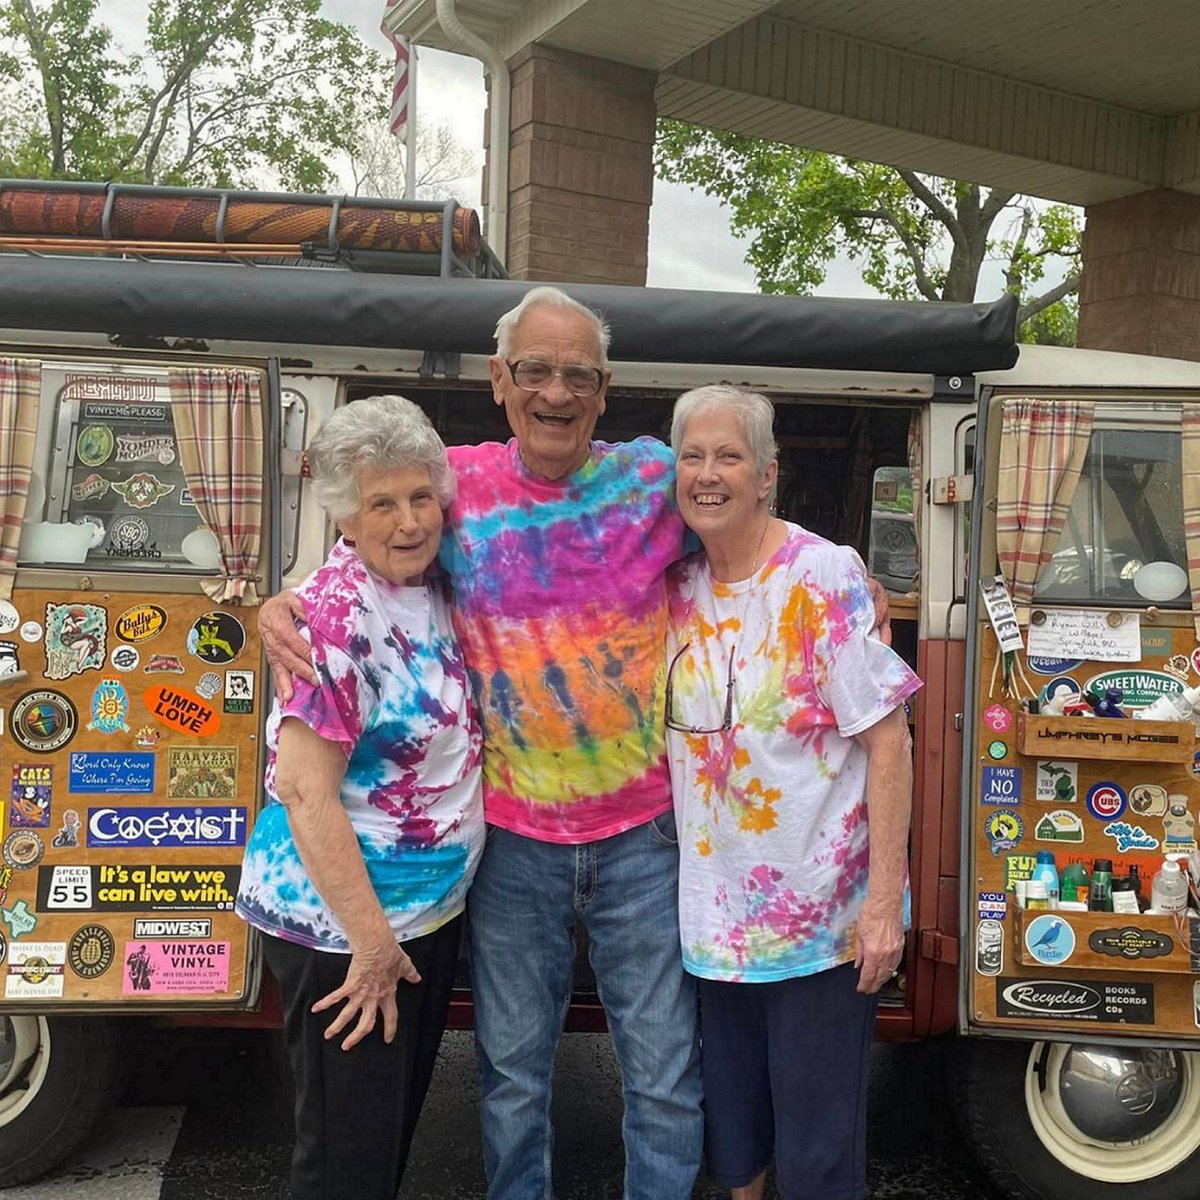 The Waterford at Ironbridge recently hosted a “far out” hippie party with a decked out VW bus and bug, a vegetarian menu, and “hearts full of peace, love and happiness!”

#FlowerPower #GroovySeniors #SonidaSeniorLiving #SeniorLiving #SonidaJoyfulNotes #FindYourJoyHere